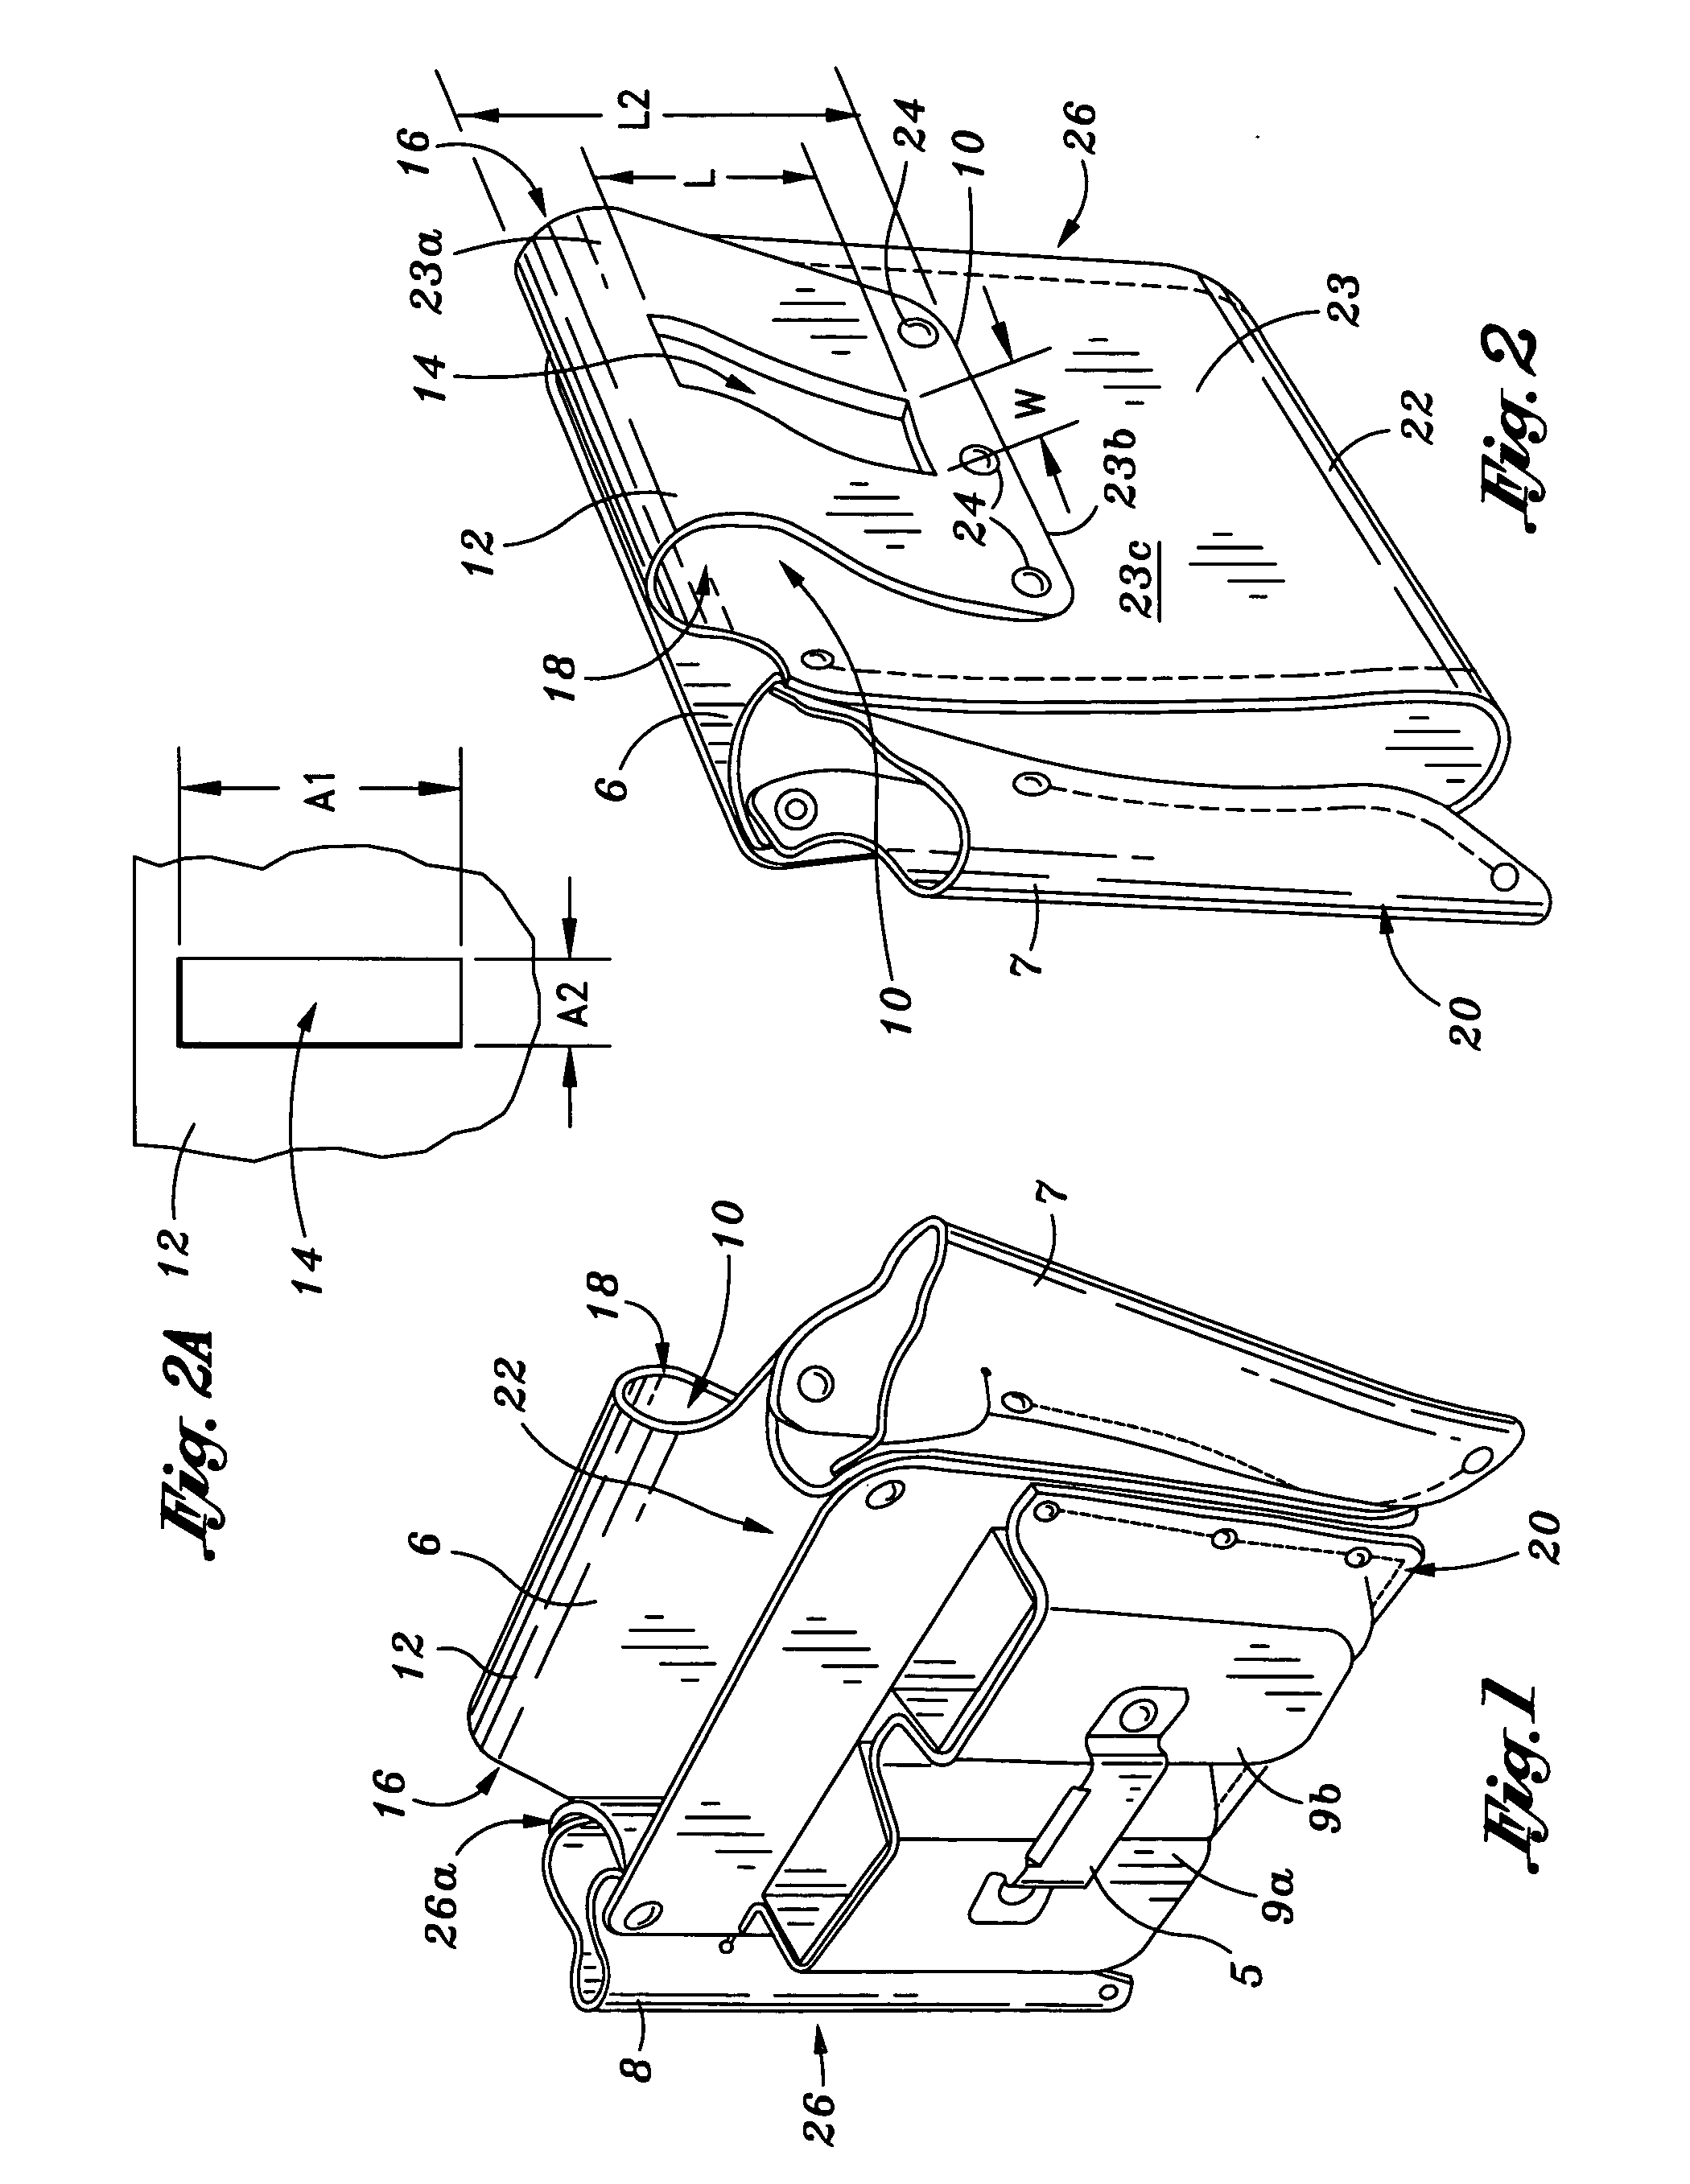 Positional locking tool pouch & method of use